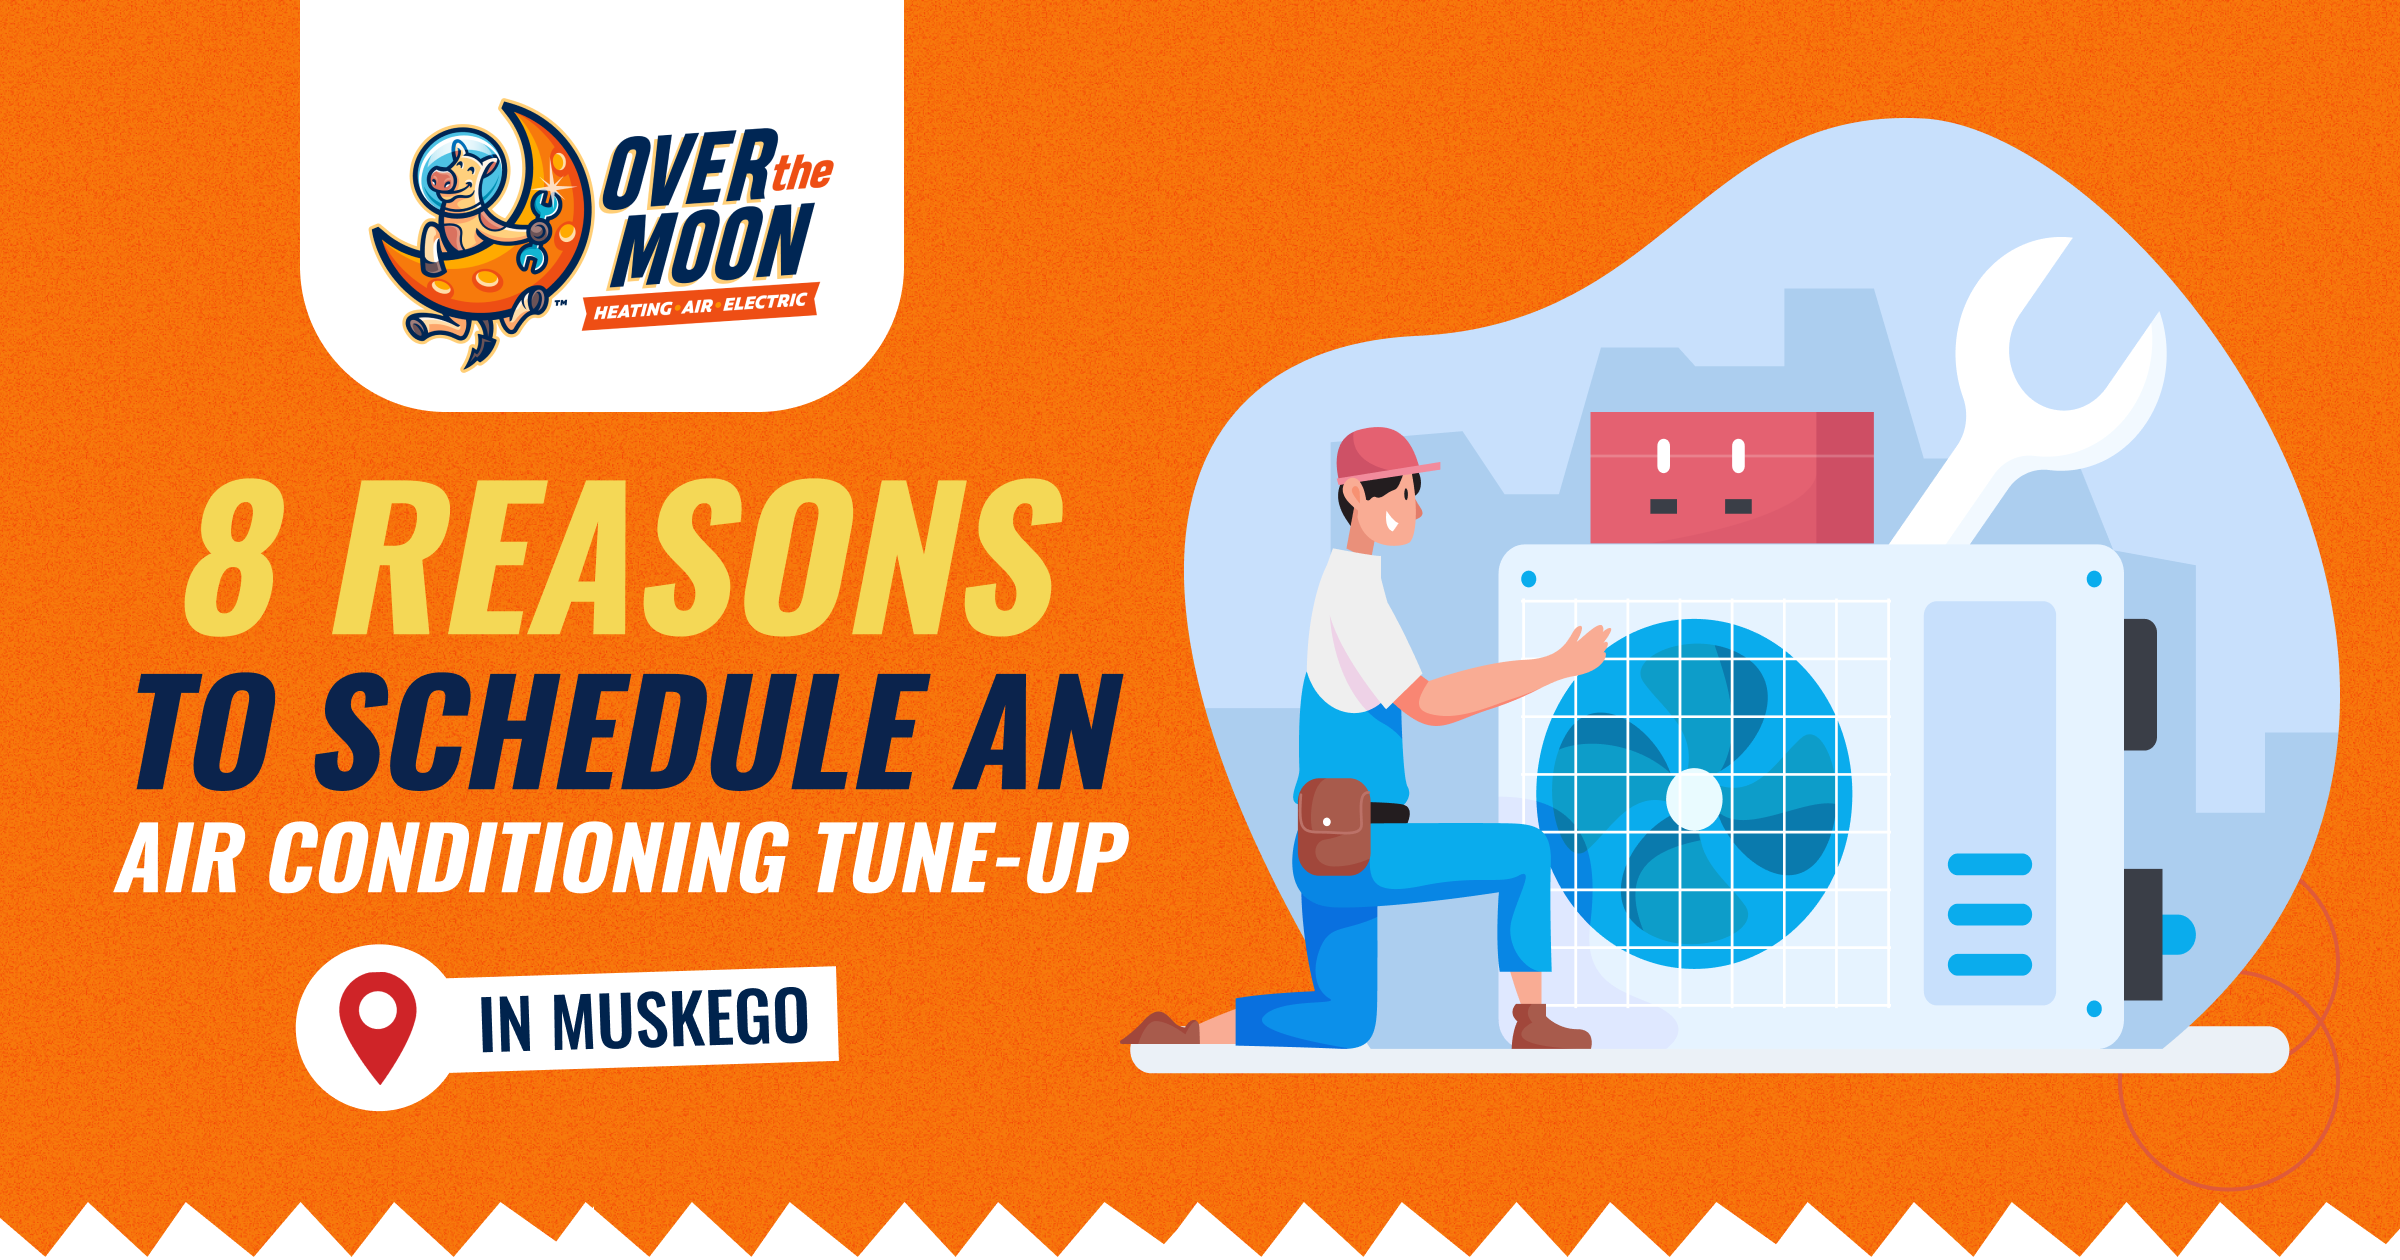 Over The Moon 8 Reasons To Schedule An Air Conditioning Tune Up In Muskego (1)